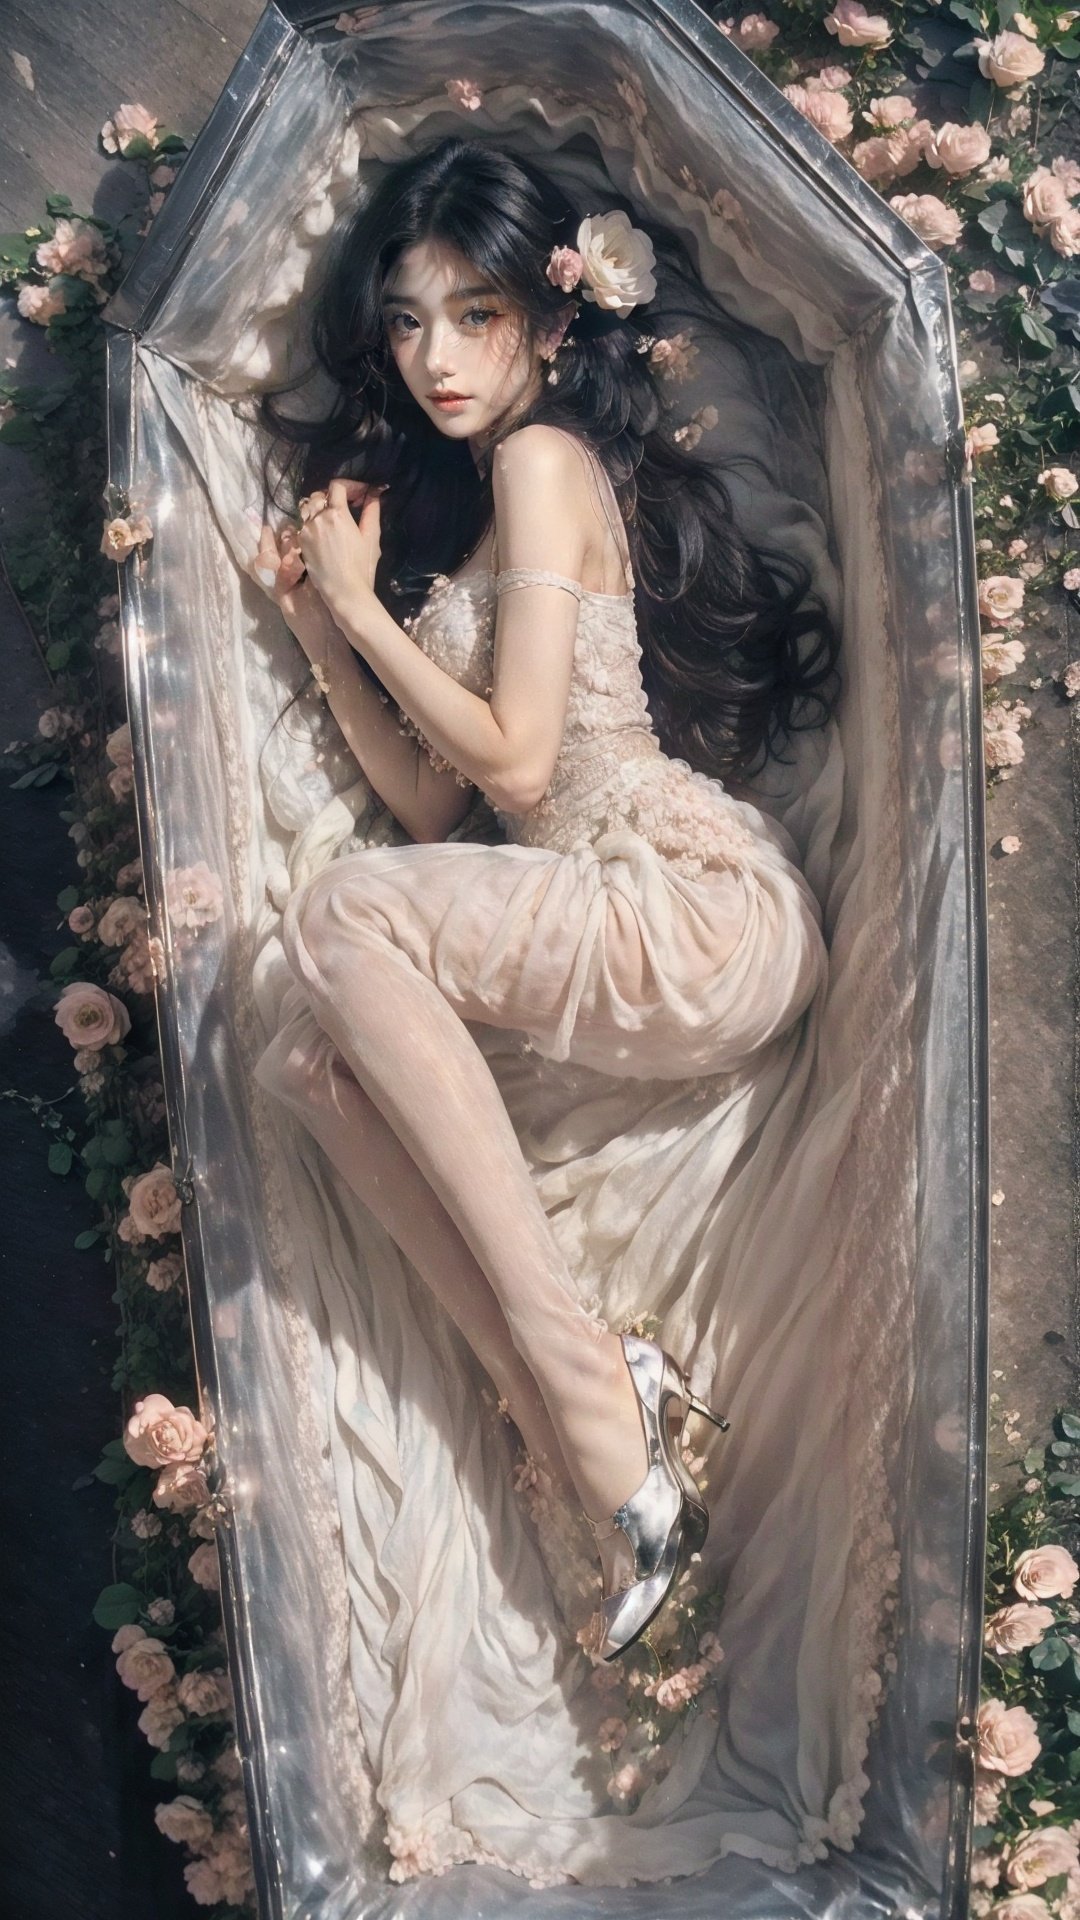 1girl,flower,high heels,black dress,crystal,gem,solo,(lying),(coffin),Ethereal and muted color palette with a focus on black and gold,(masterpiece),(best quality),(make up),blush,earring,heart,<lora:coffin棺:0.56>,<lora:星:0.38>,(photorealistic:1.4),bai(\yang)\,chibi,(flower),hair ornament,melancholy,Moody,(atmospheric),fine details,cinematic composition,soft lighting,nostalgic,evocative,hazy atmosphere,a sense of solitude,dreamlike atmosphere,melancholic,in_coffin,melancholy,nostalgic,solitude,elegance and sophistication,introspective composition,vintage elements,(blue roses:1.2),ridiculous fantasies,detailed textures,evocative composition,(flower field:1.2),<lora:Detail Tweaker LoRA（细节调整LoRA）:0.35>,<lora:behisheroinev2:0.08>,white footwearblurry,legs,slim legs,(full body:1.1),(be his heroine:0.3),<lora:WarmLight暖光:0.4>,<lora:Mysterious signs 神秘符號:0.45>,<lora:肉色吊带袜油光版:0.45>,pool,high strappy shoes,(gianvito rossi),focus on the character's face,pretty face,PERFECT FACE,perfect hand,golden light,wonderful light,sea,<lora:光影玫瑰_v1.0:0.4>,<lora:花碎花:0.6>,<lora:add_detail加细节:0.4>,